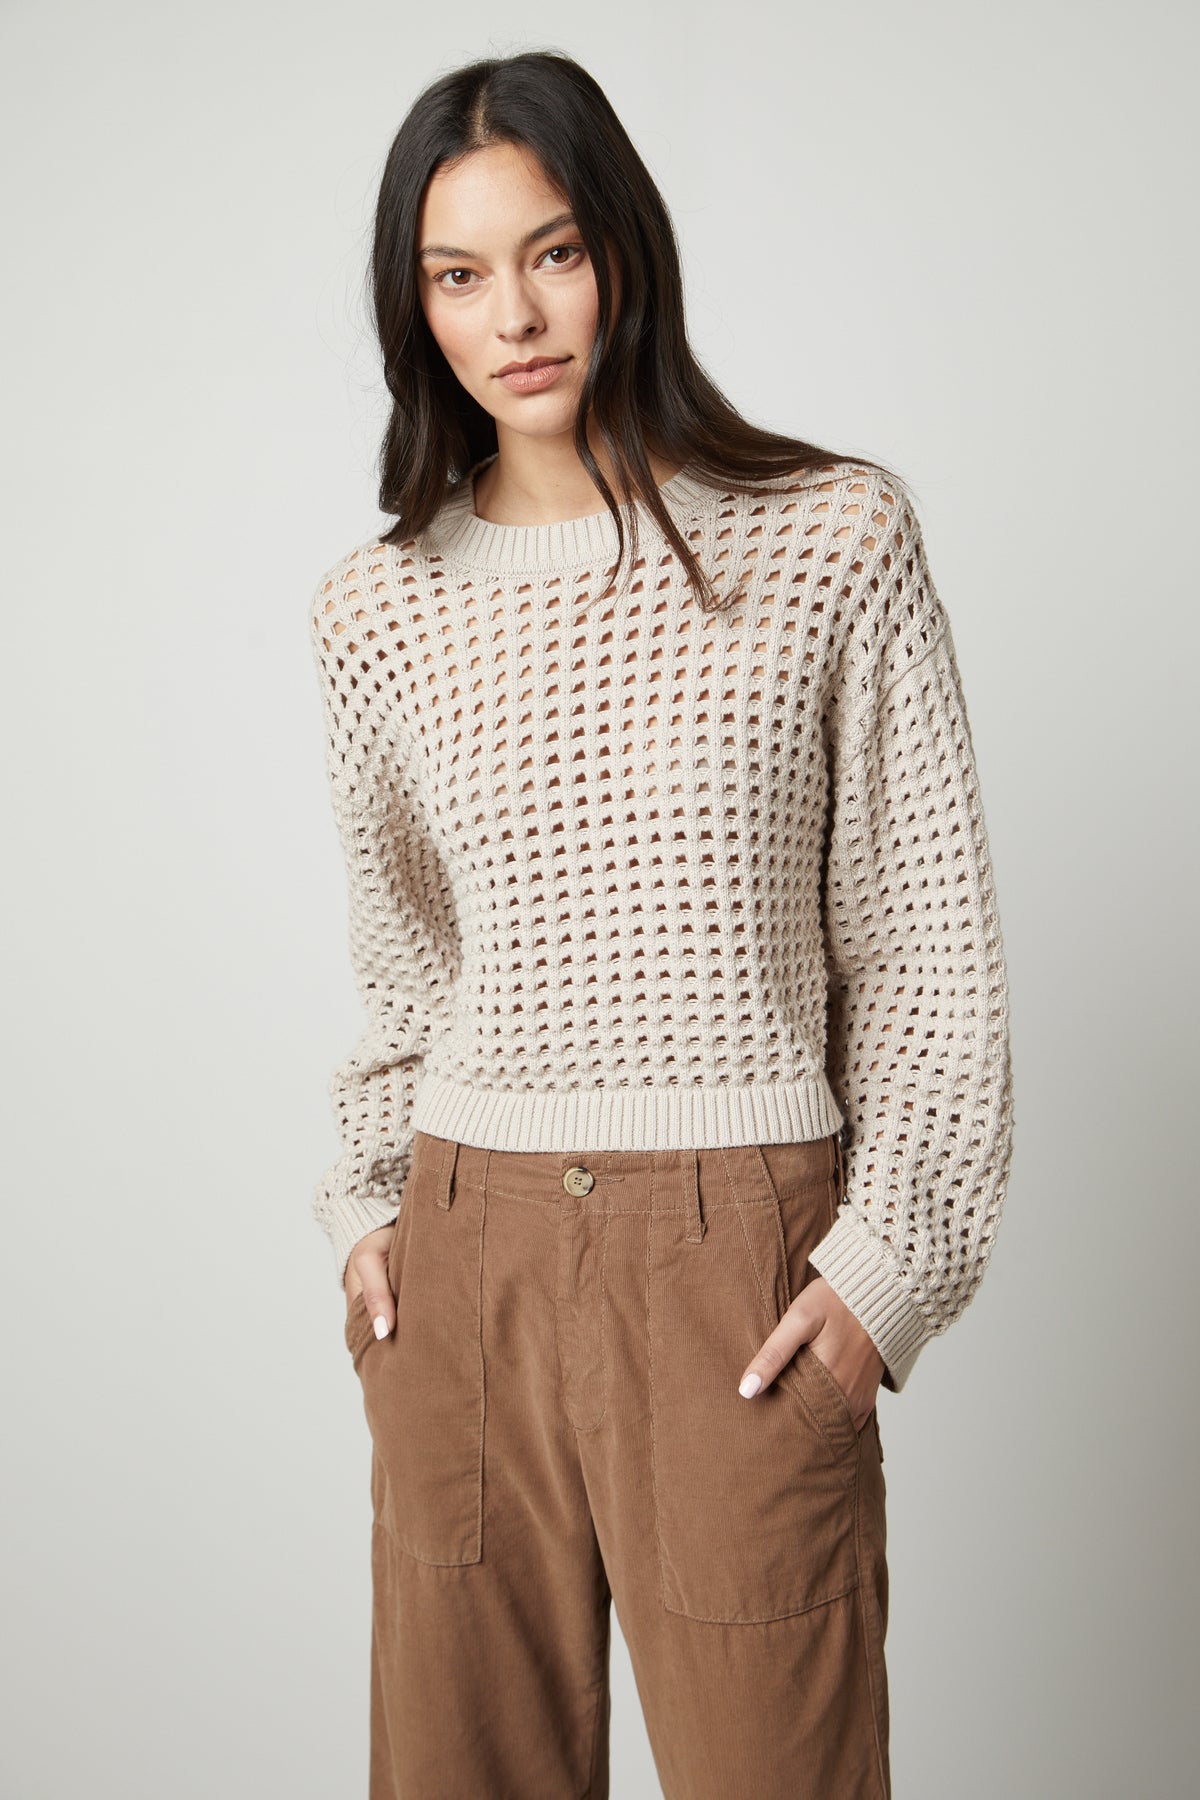 The model is wearing a Velvet by Graham & Spencer SAMMIE MESH KNIT CREW NECK SWEATER and tan trousers.-26897858789569